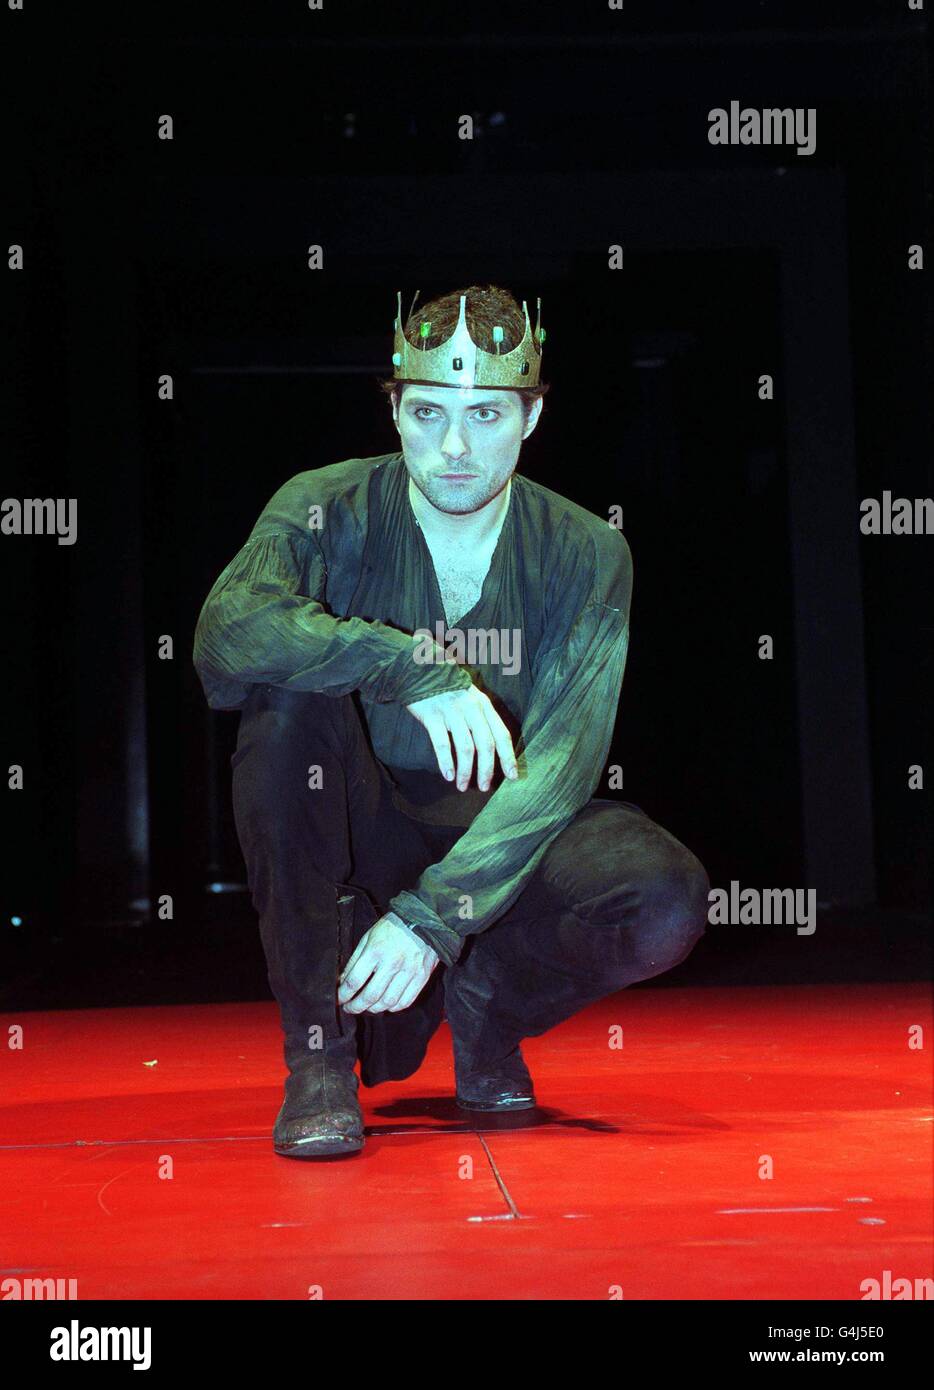 Rufus Sewell as Macbeth on stage at the Queen's Theatre during a dress rehearsal for the William Shakespeare play. Stock Photo